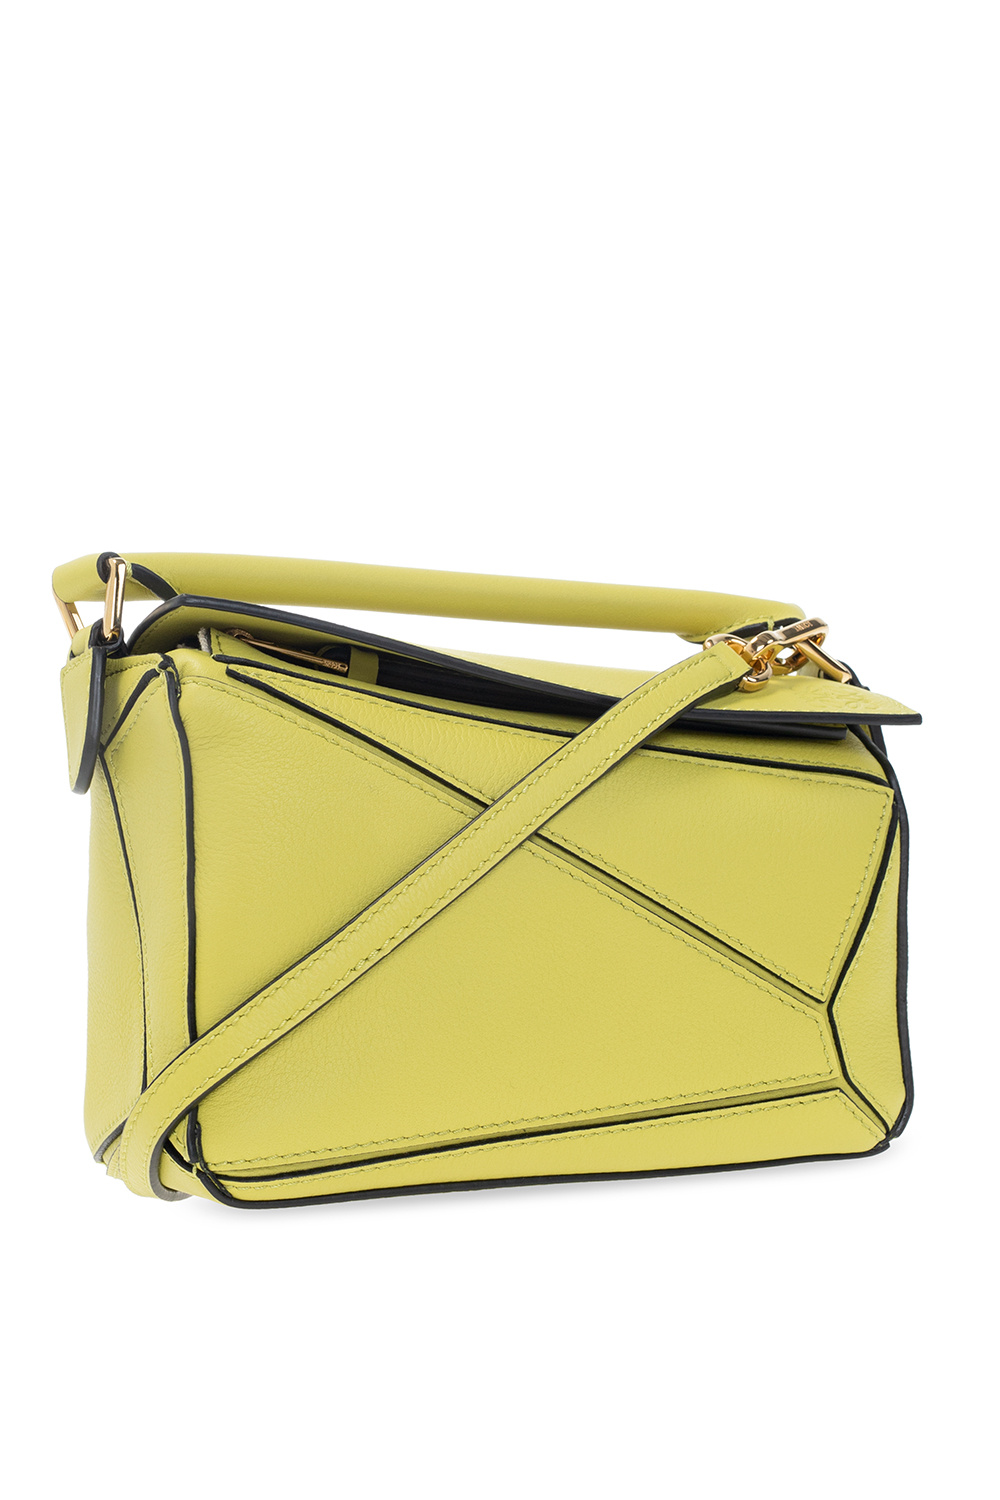 Loewe Puzzle Nano Leather Shoulder Bag In Yellow